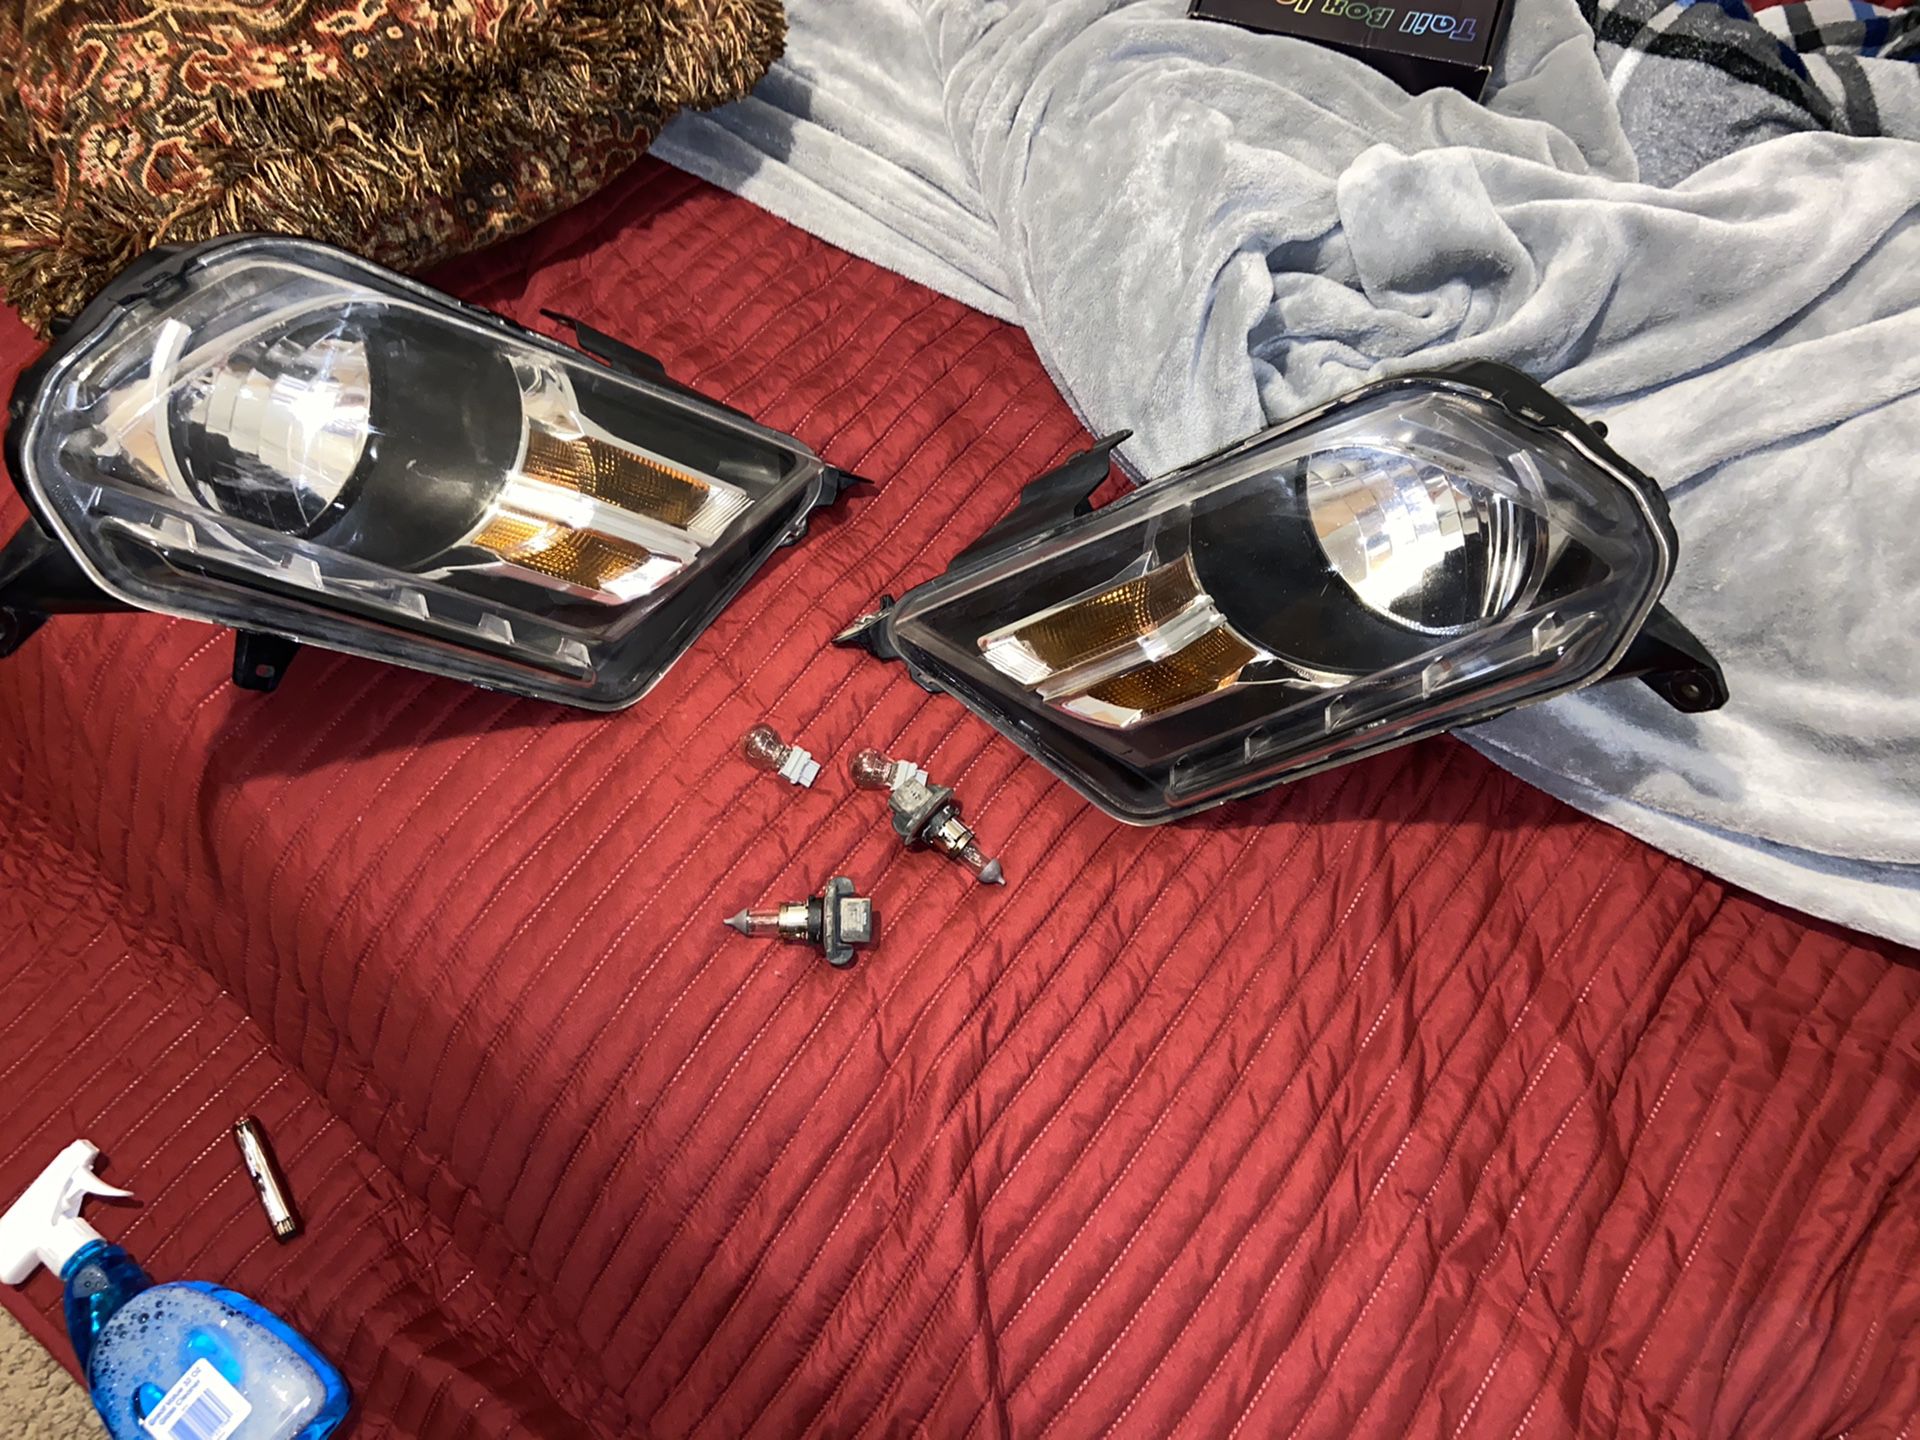 2010 mustang headlights (not for free)